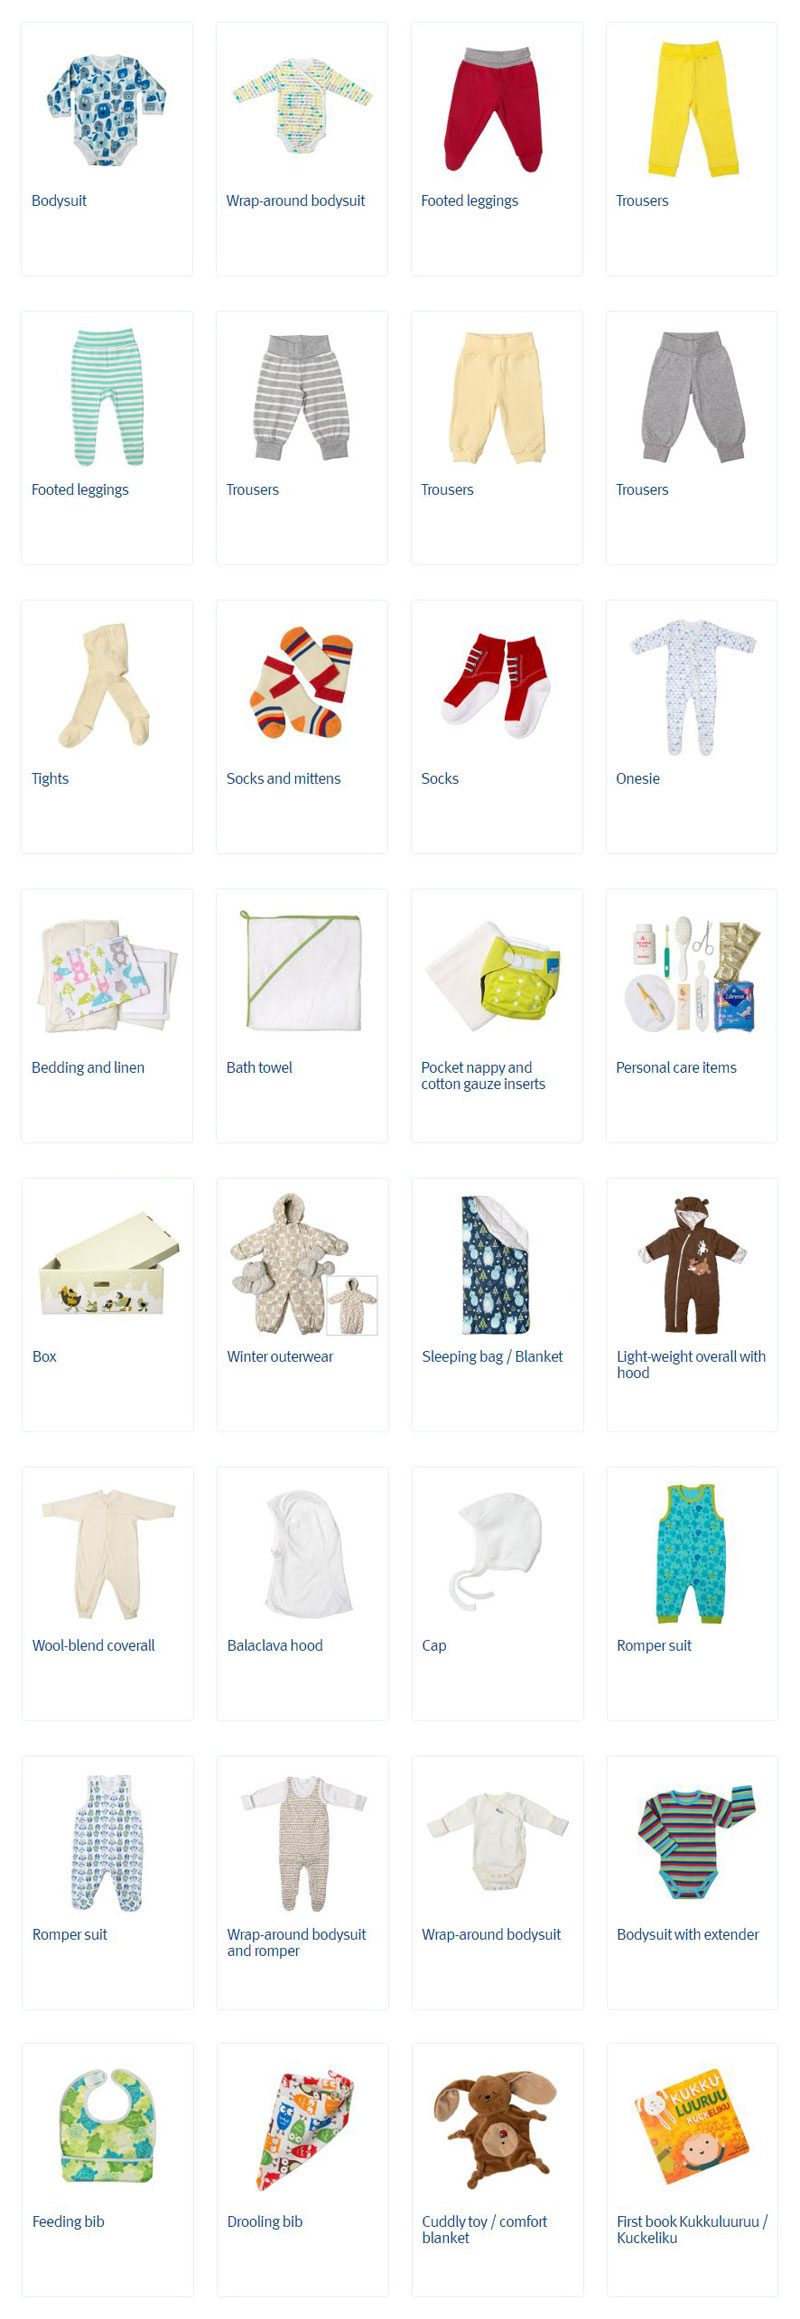 baby box finland 2 Starting Next Year, Every Baby Born in Scotland Will Get a Free Box of Useful Things